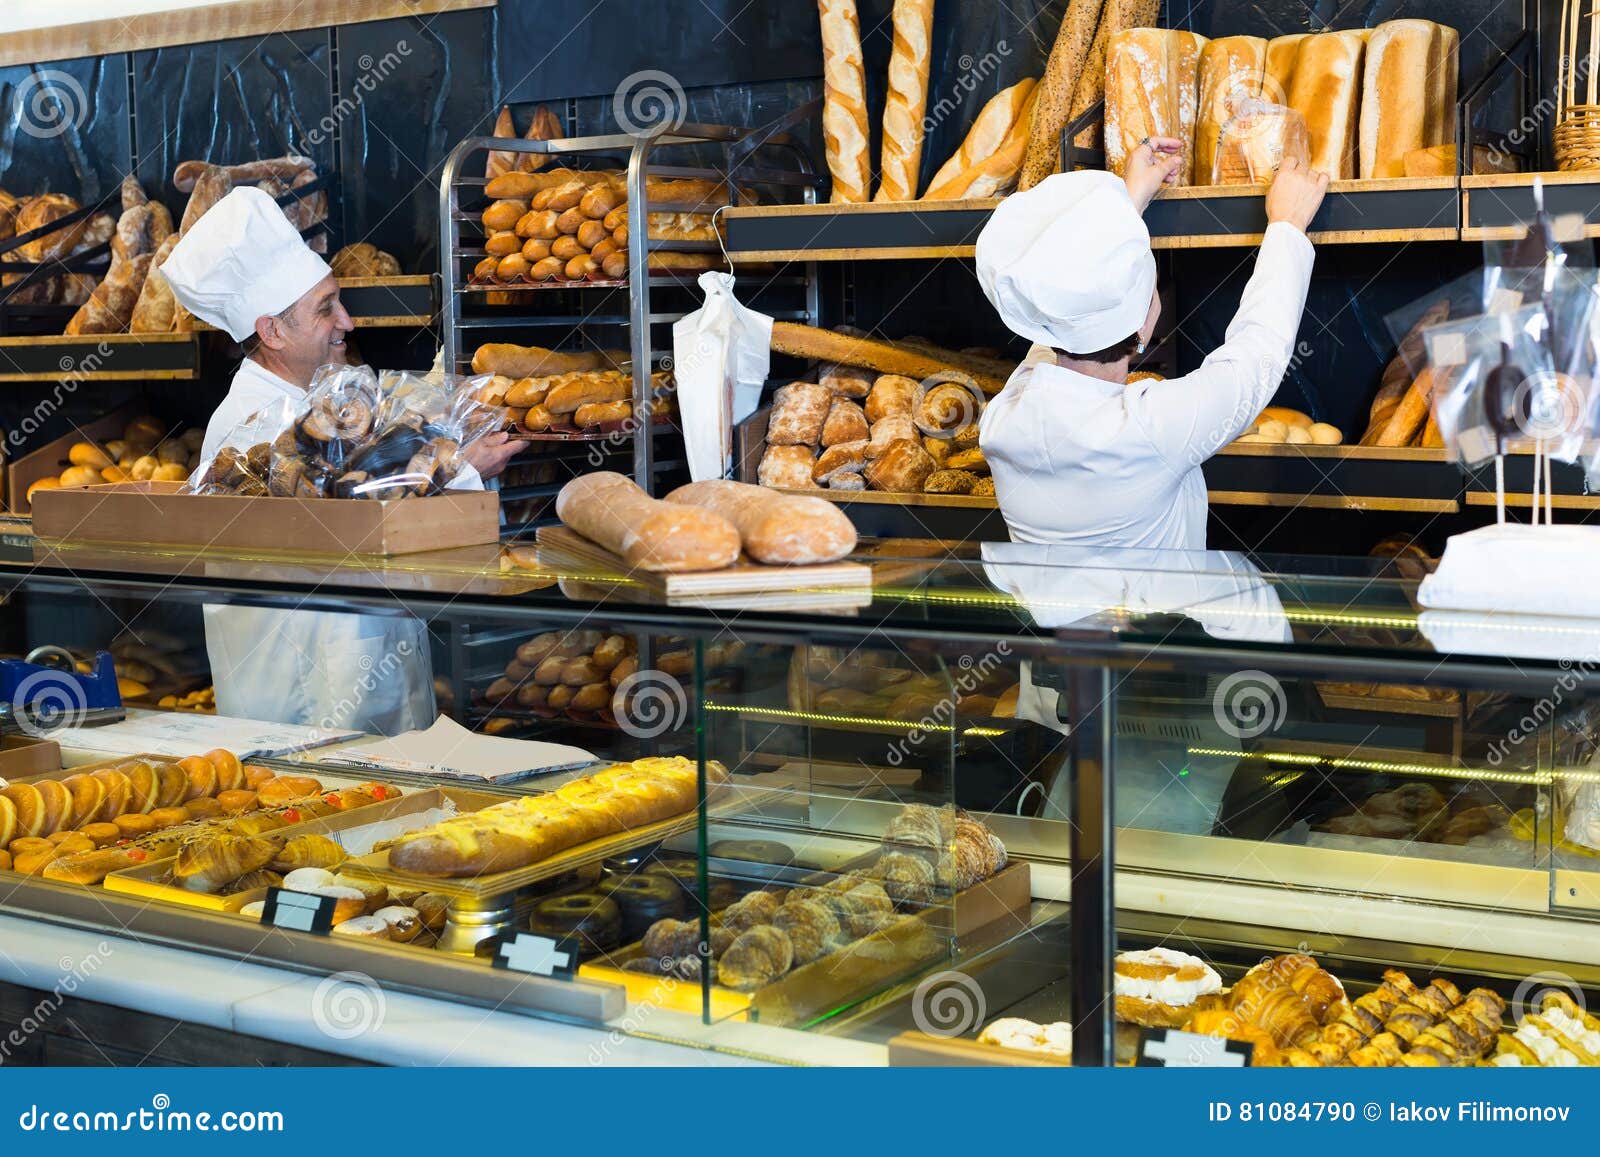 Two Bakers Counter Bakery Friendly Smiling Tasty Bread Products 81084790 